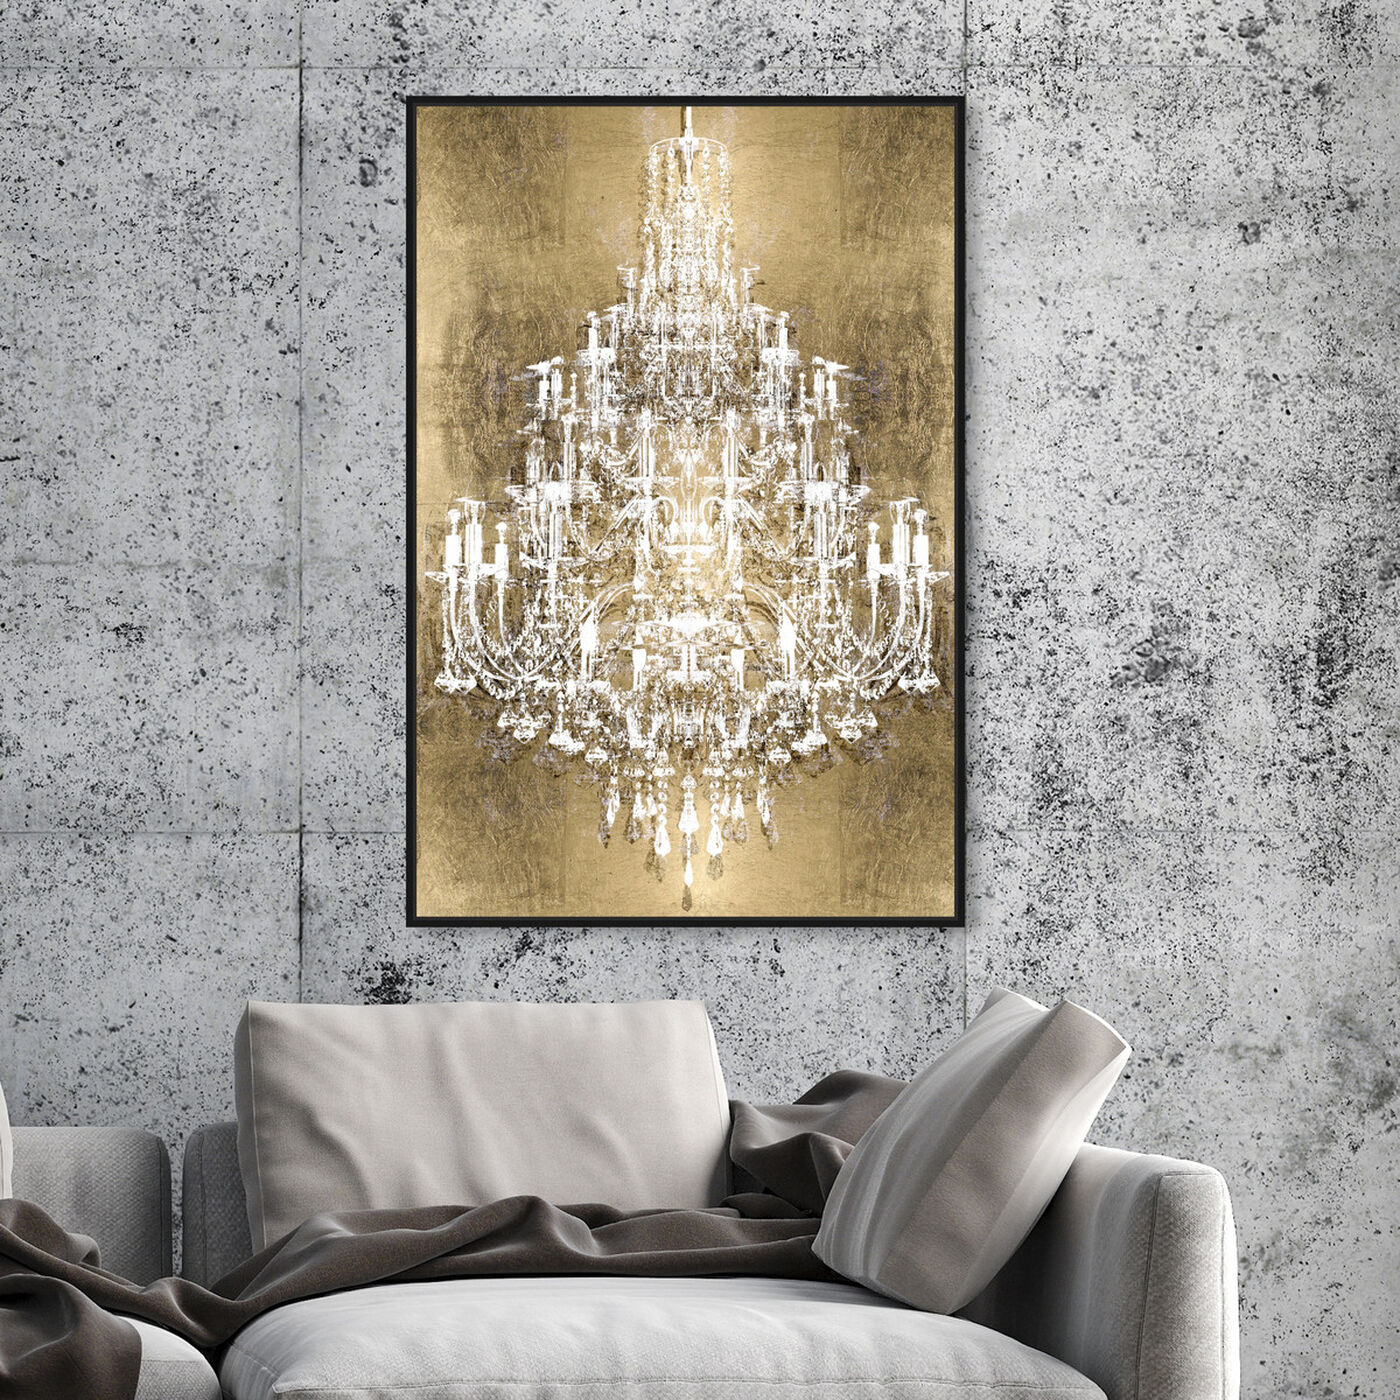 Hanging view of Montecarlo Gold featuring fashion and glam and chandeliers art.